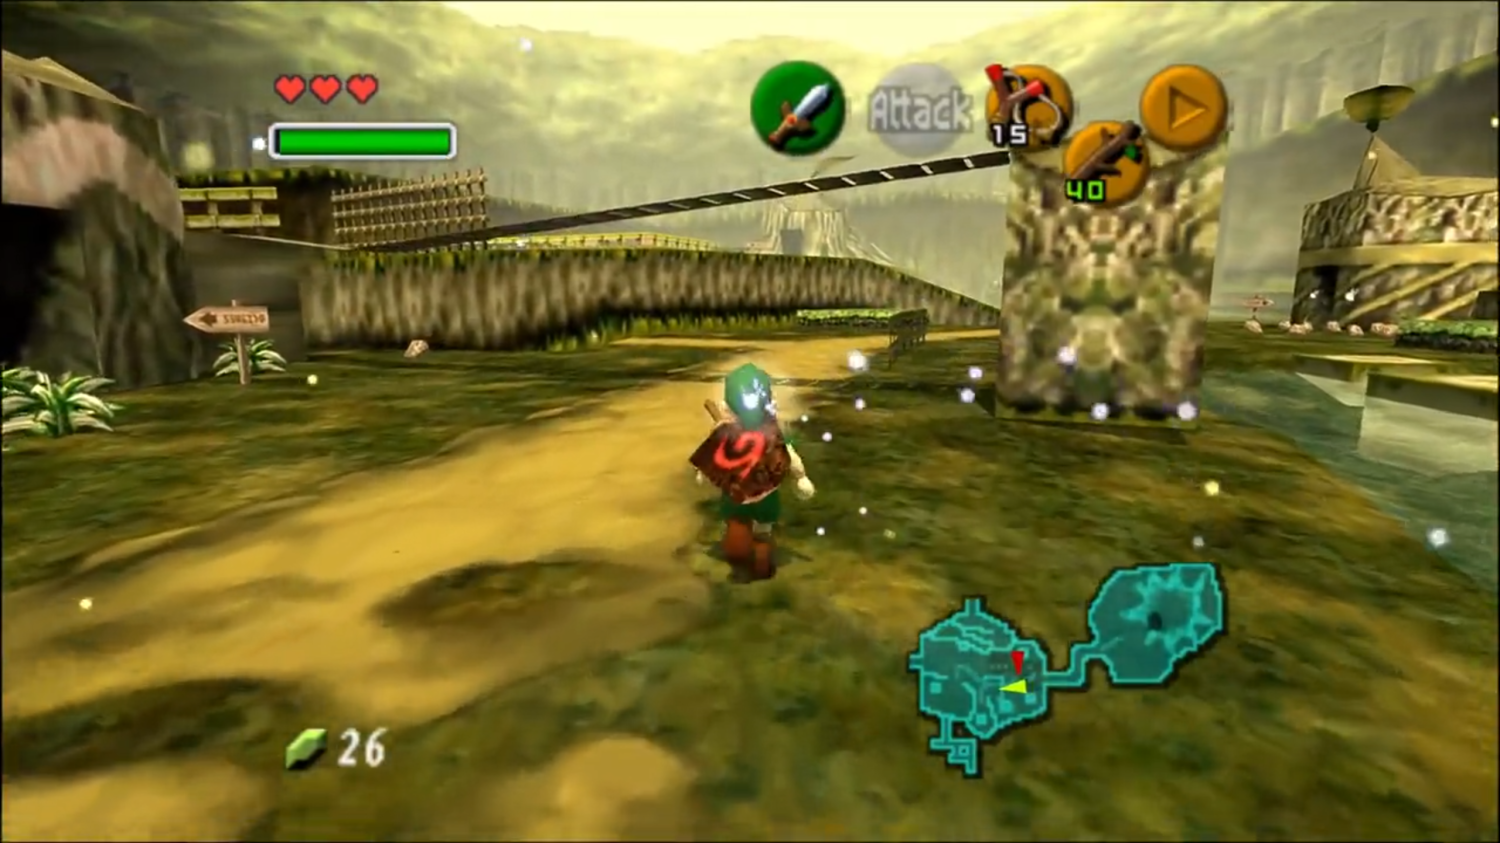 Modders are making N64 games look better than Nintendo ever could